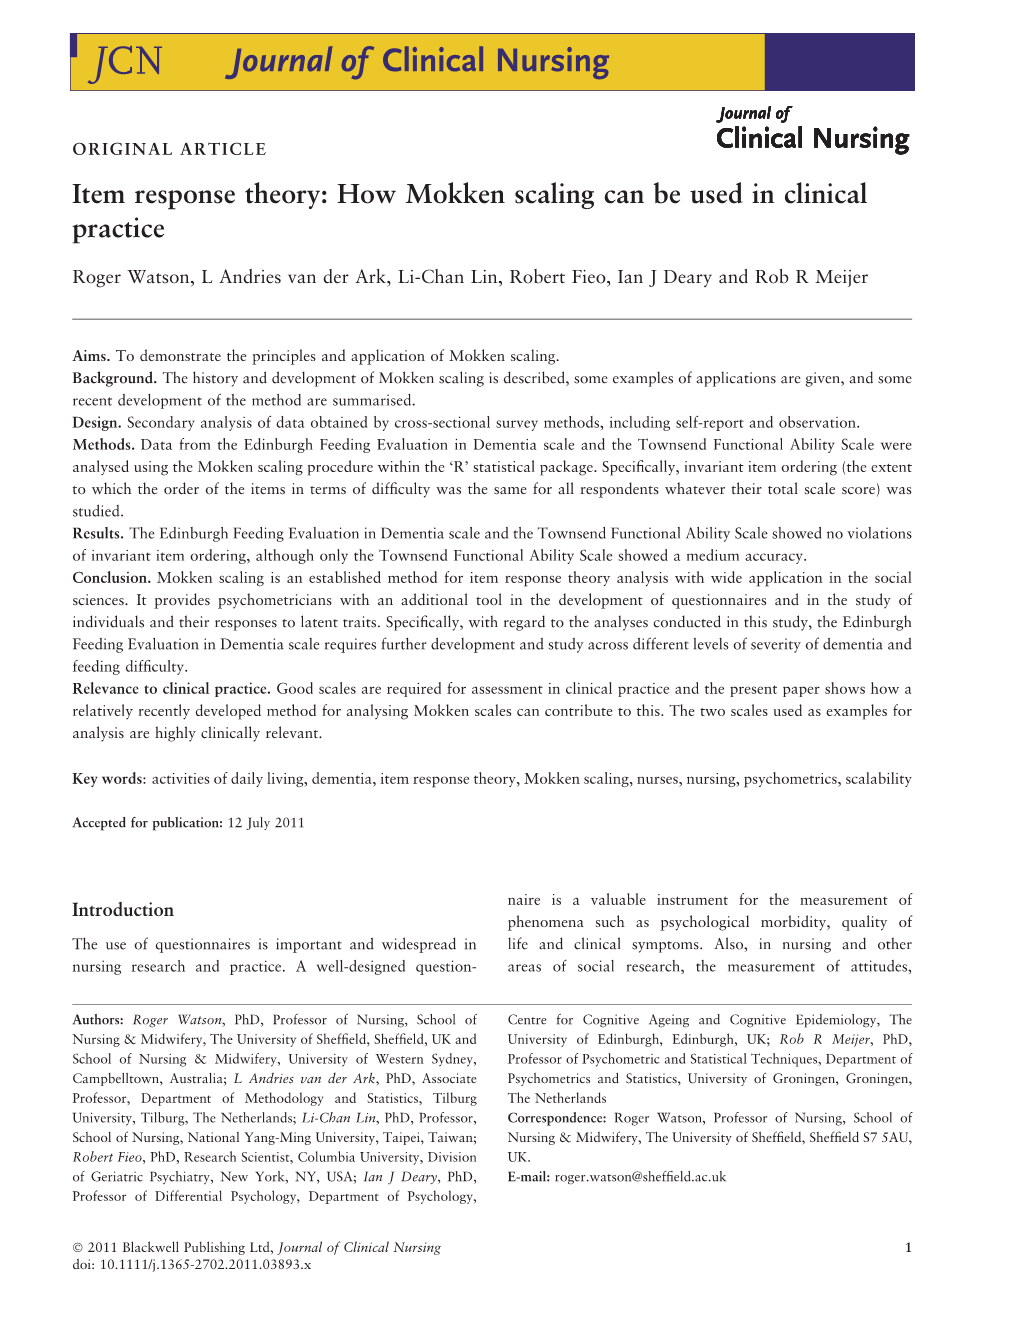 Item Response Theory: How Mokken Scaling Can Be Used in Clinical Practice